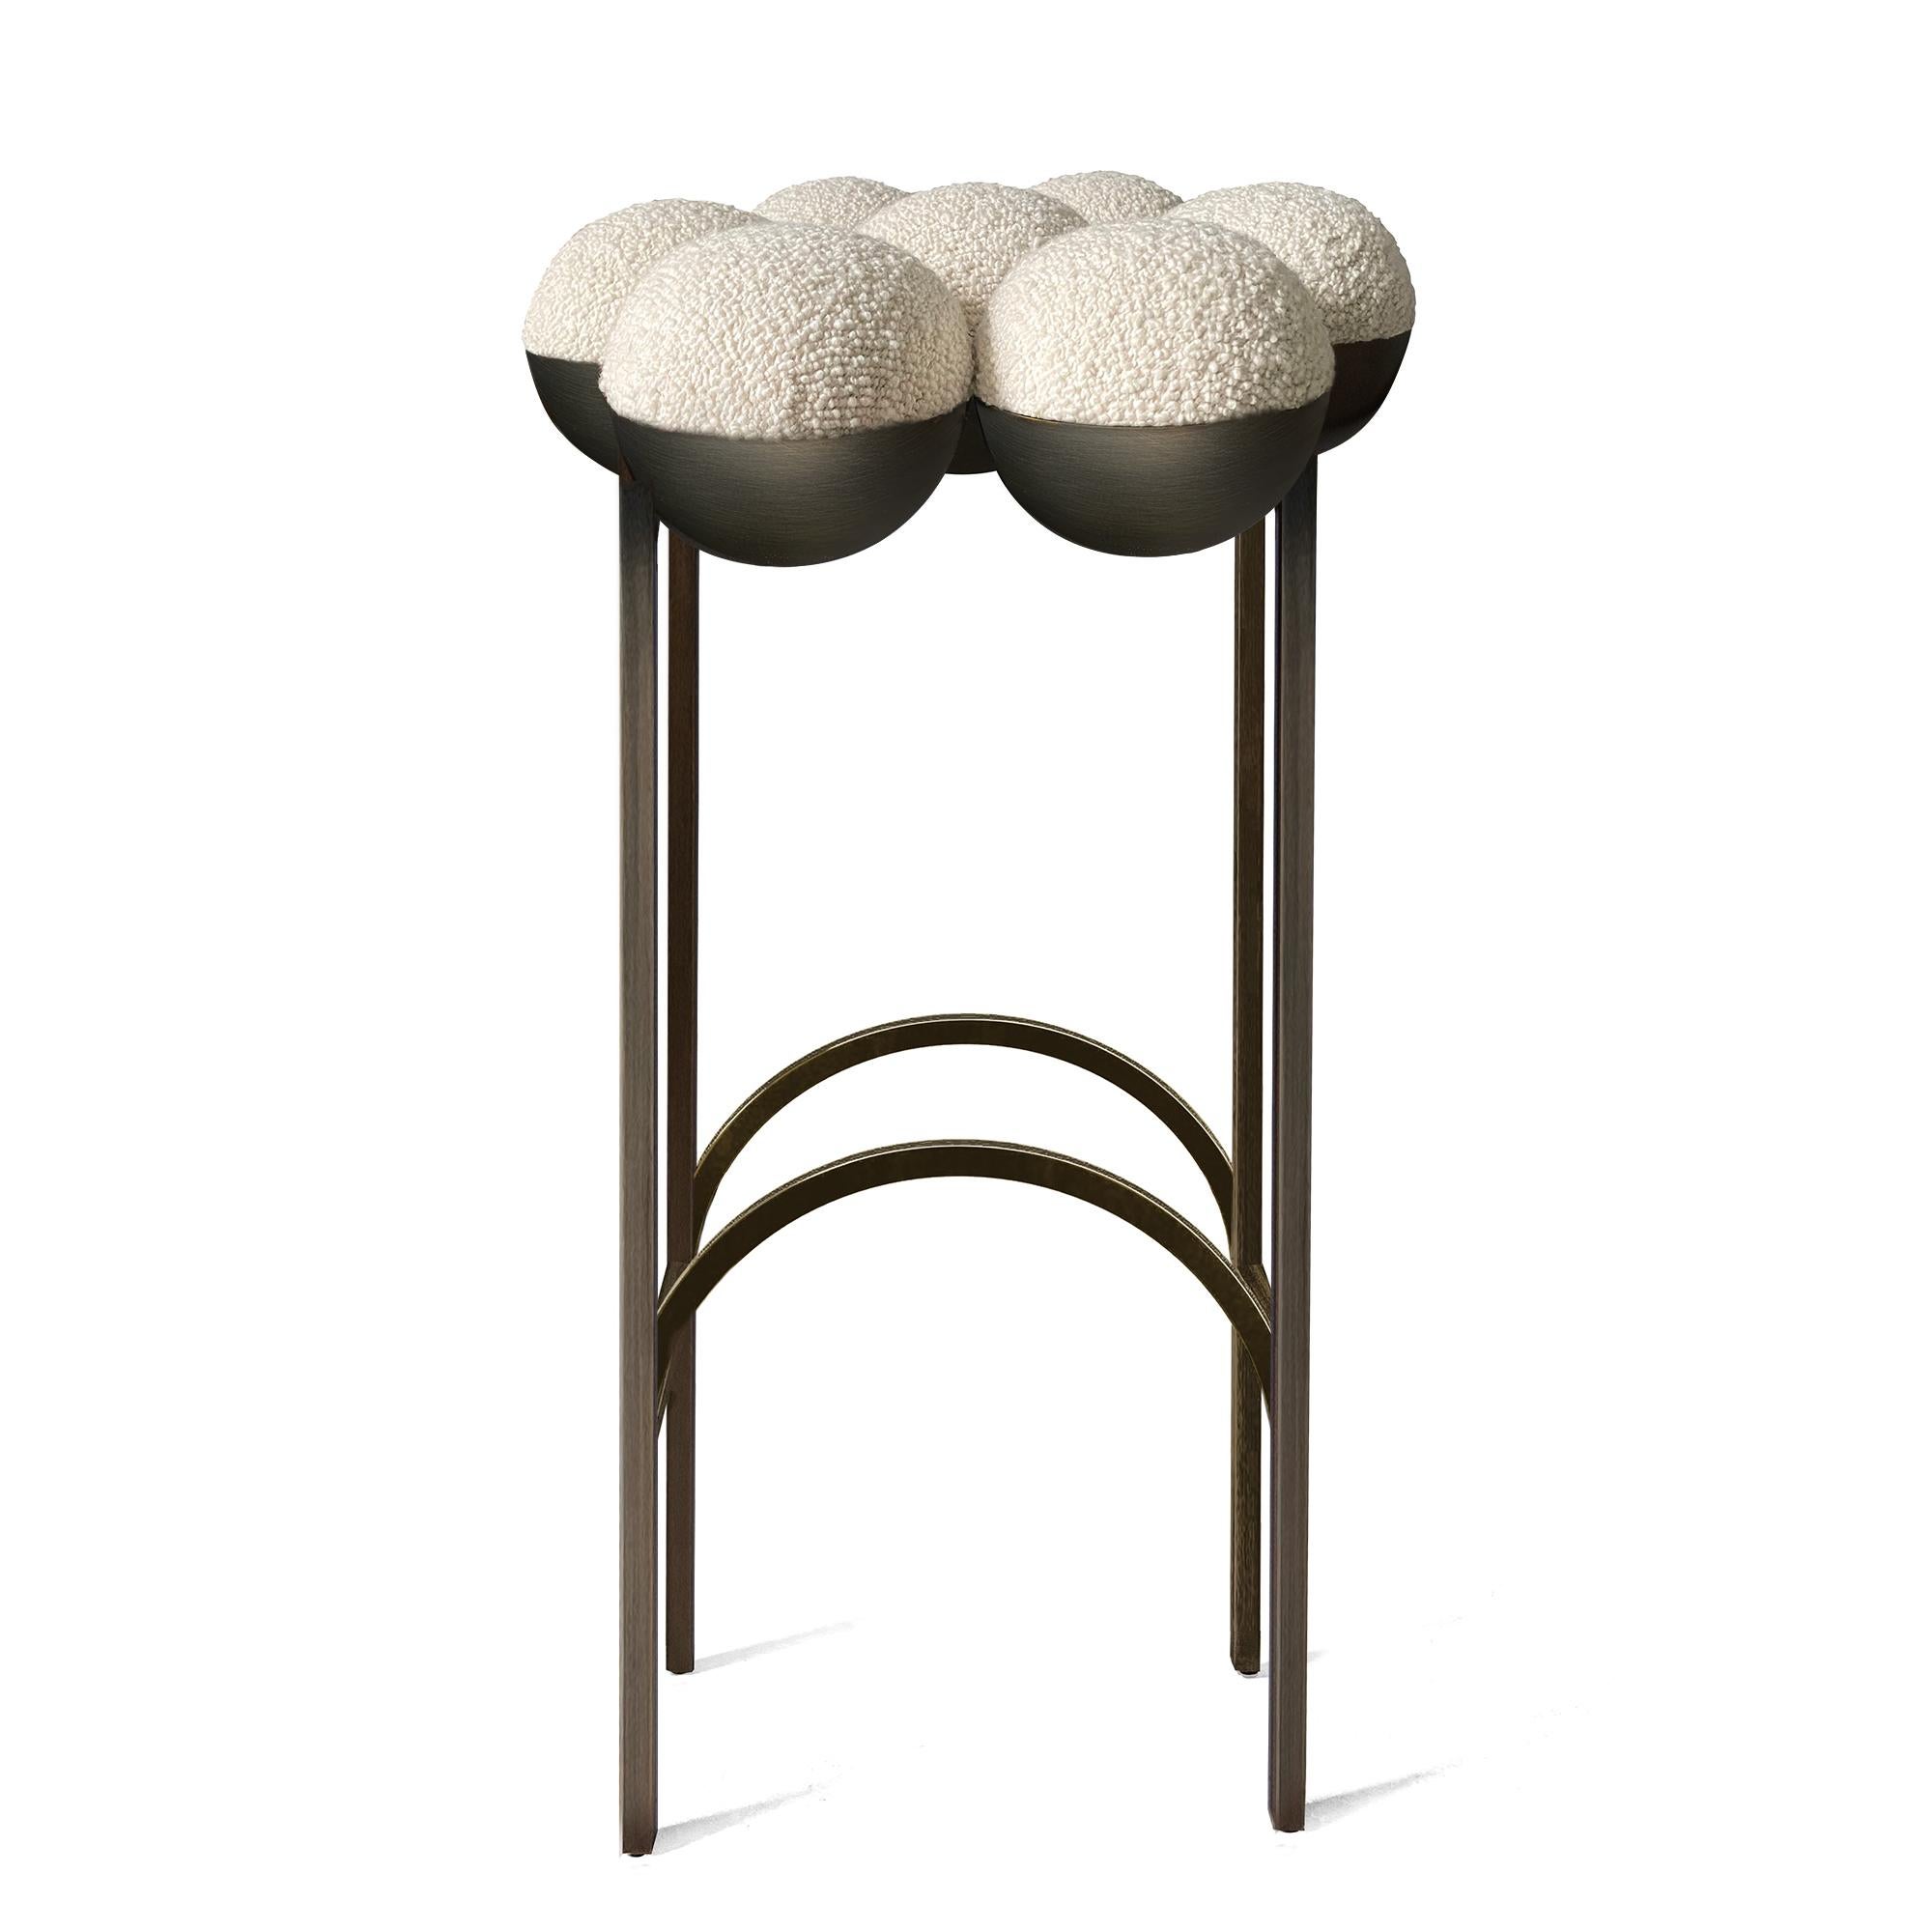 The equally singular Saturn bar stool utilizes the same gathered bilboquet seat construction, to create a more simplified but still incredibly distinctive form. The sumptuously undulating seat instantly appeals with its invitingly upholstered